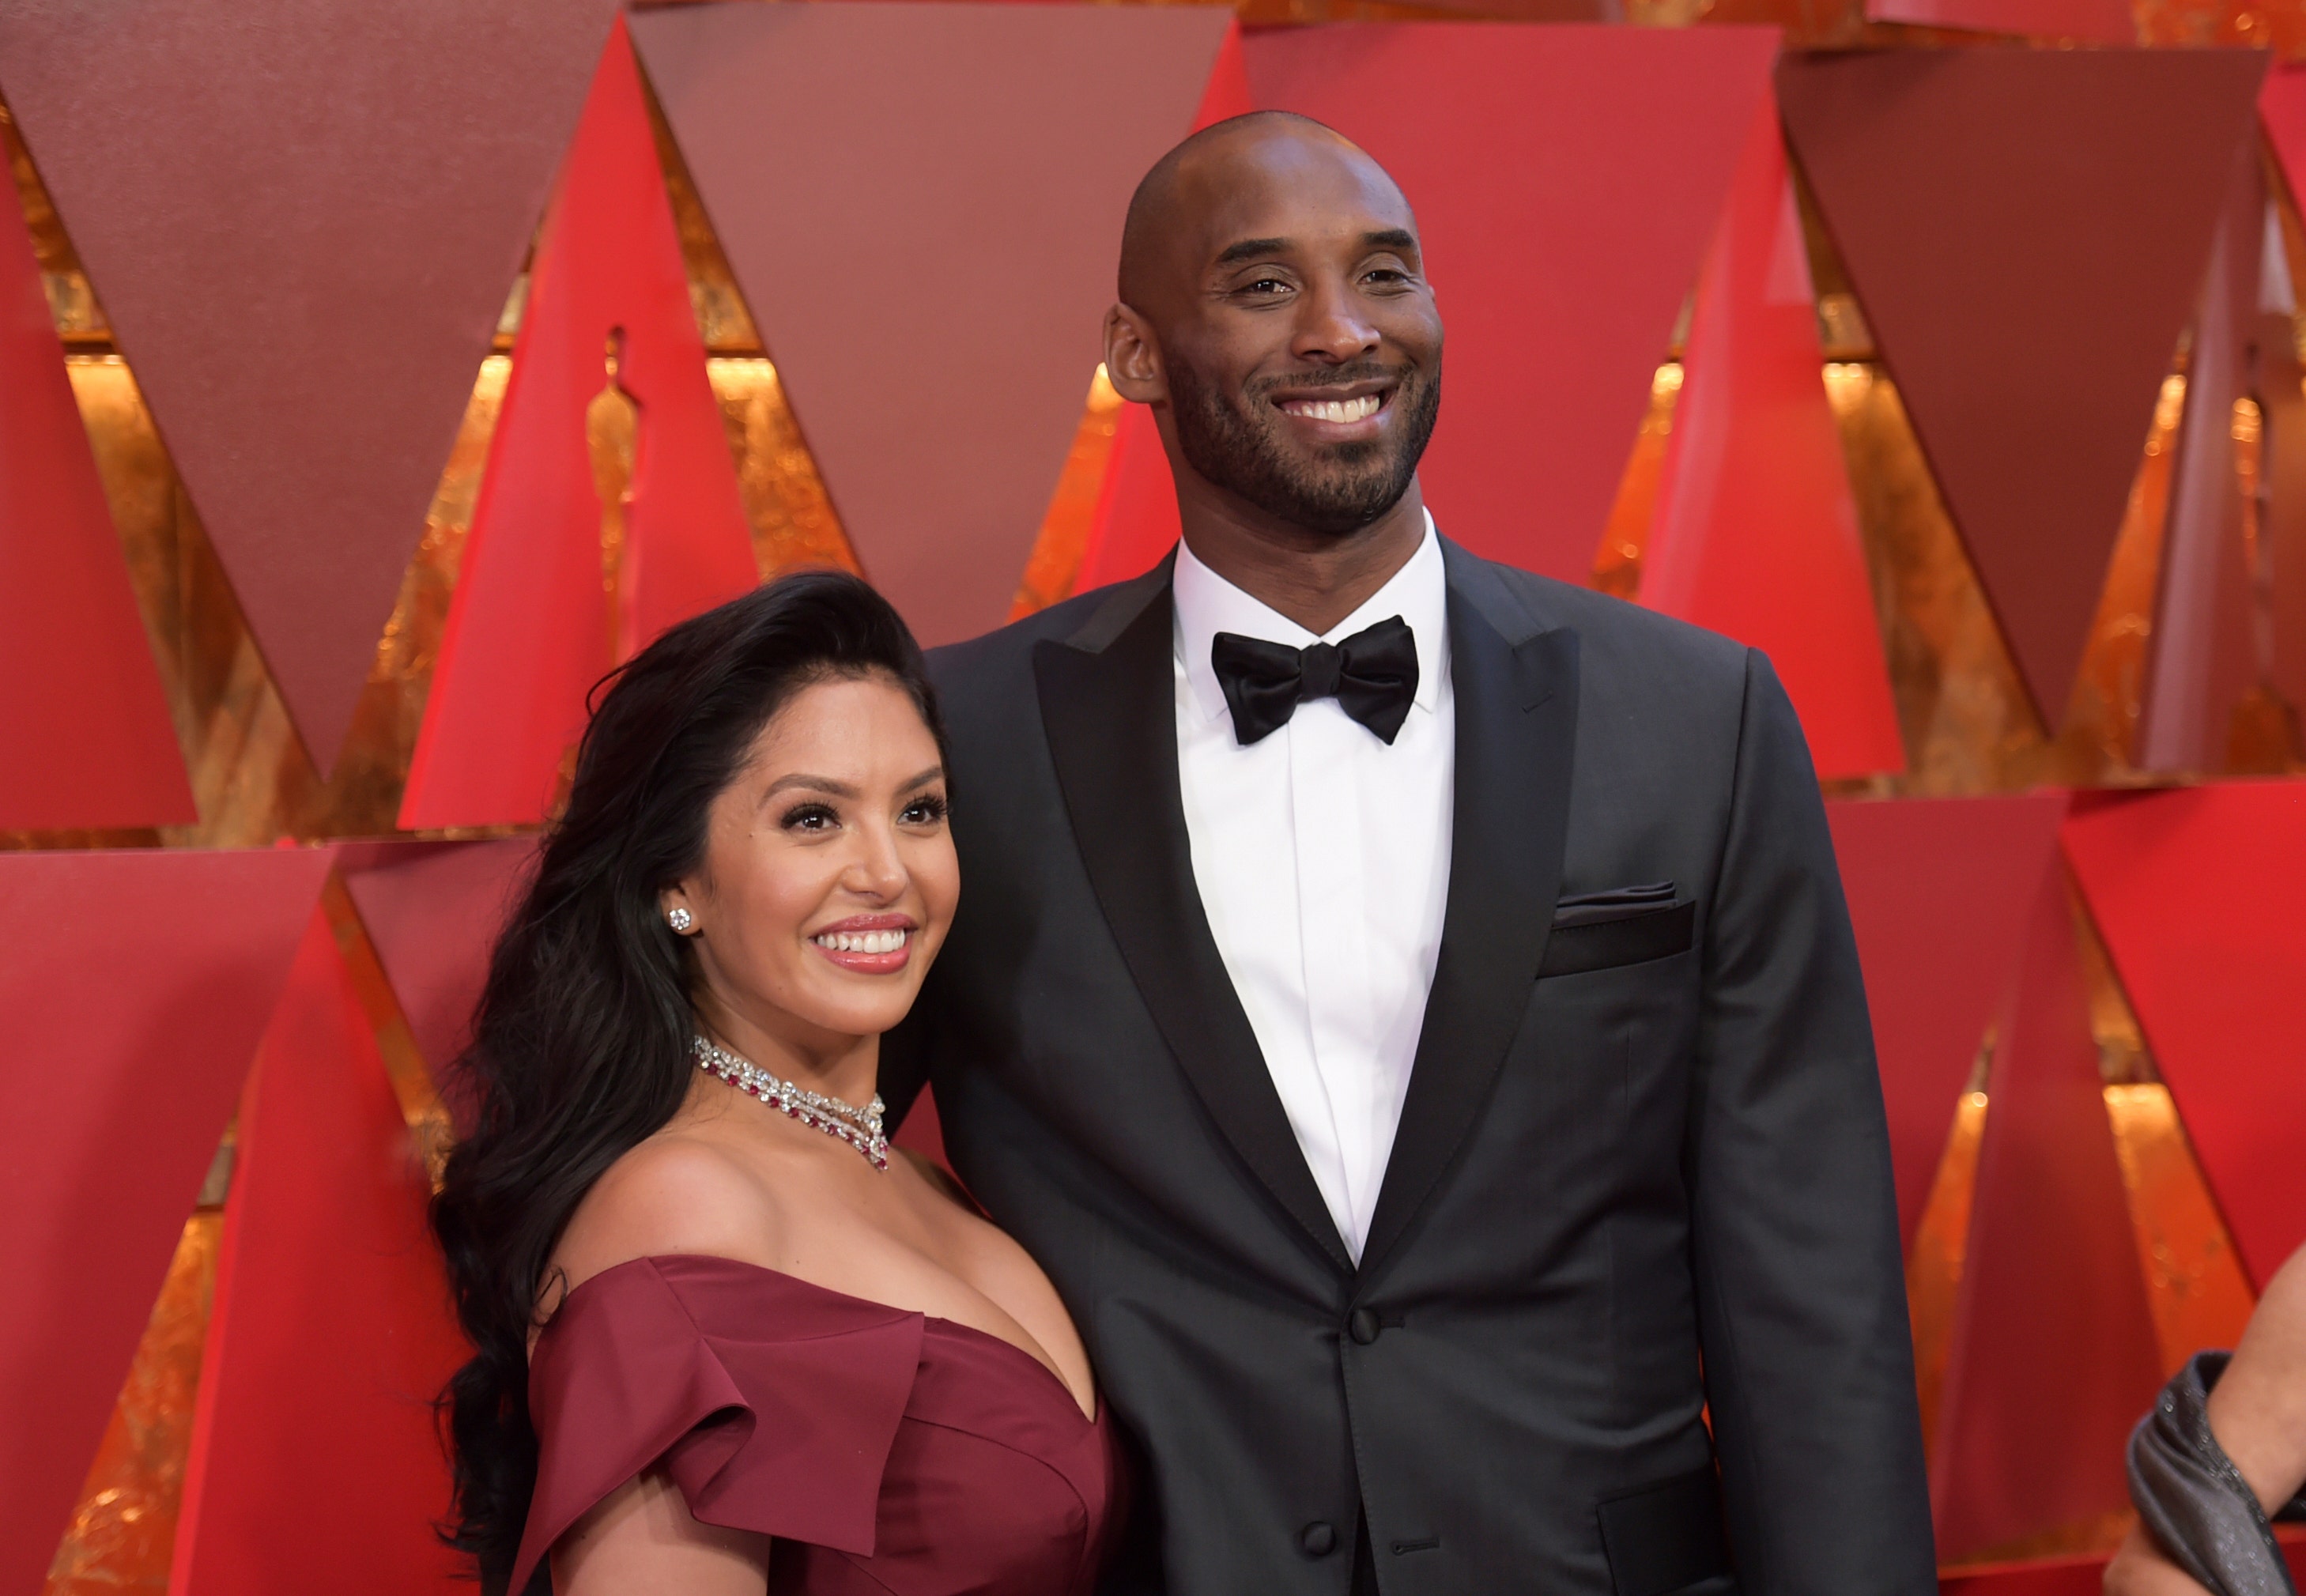 Kobe Bryant's widow, Vanessa, settles remaining claims over crash-site photos for nearly $30 million